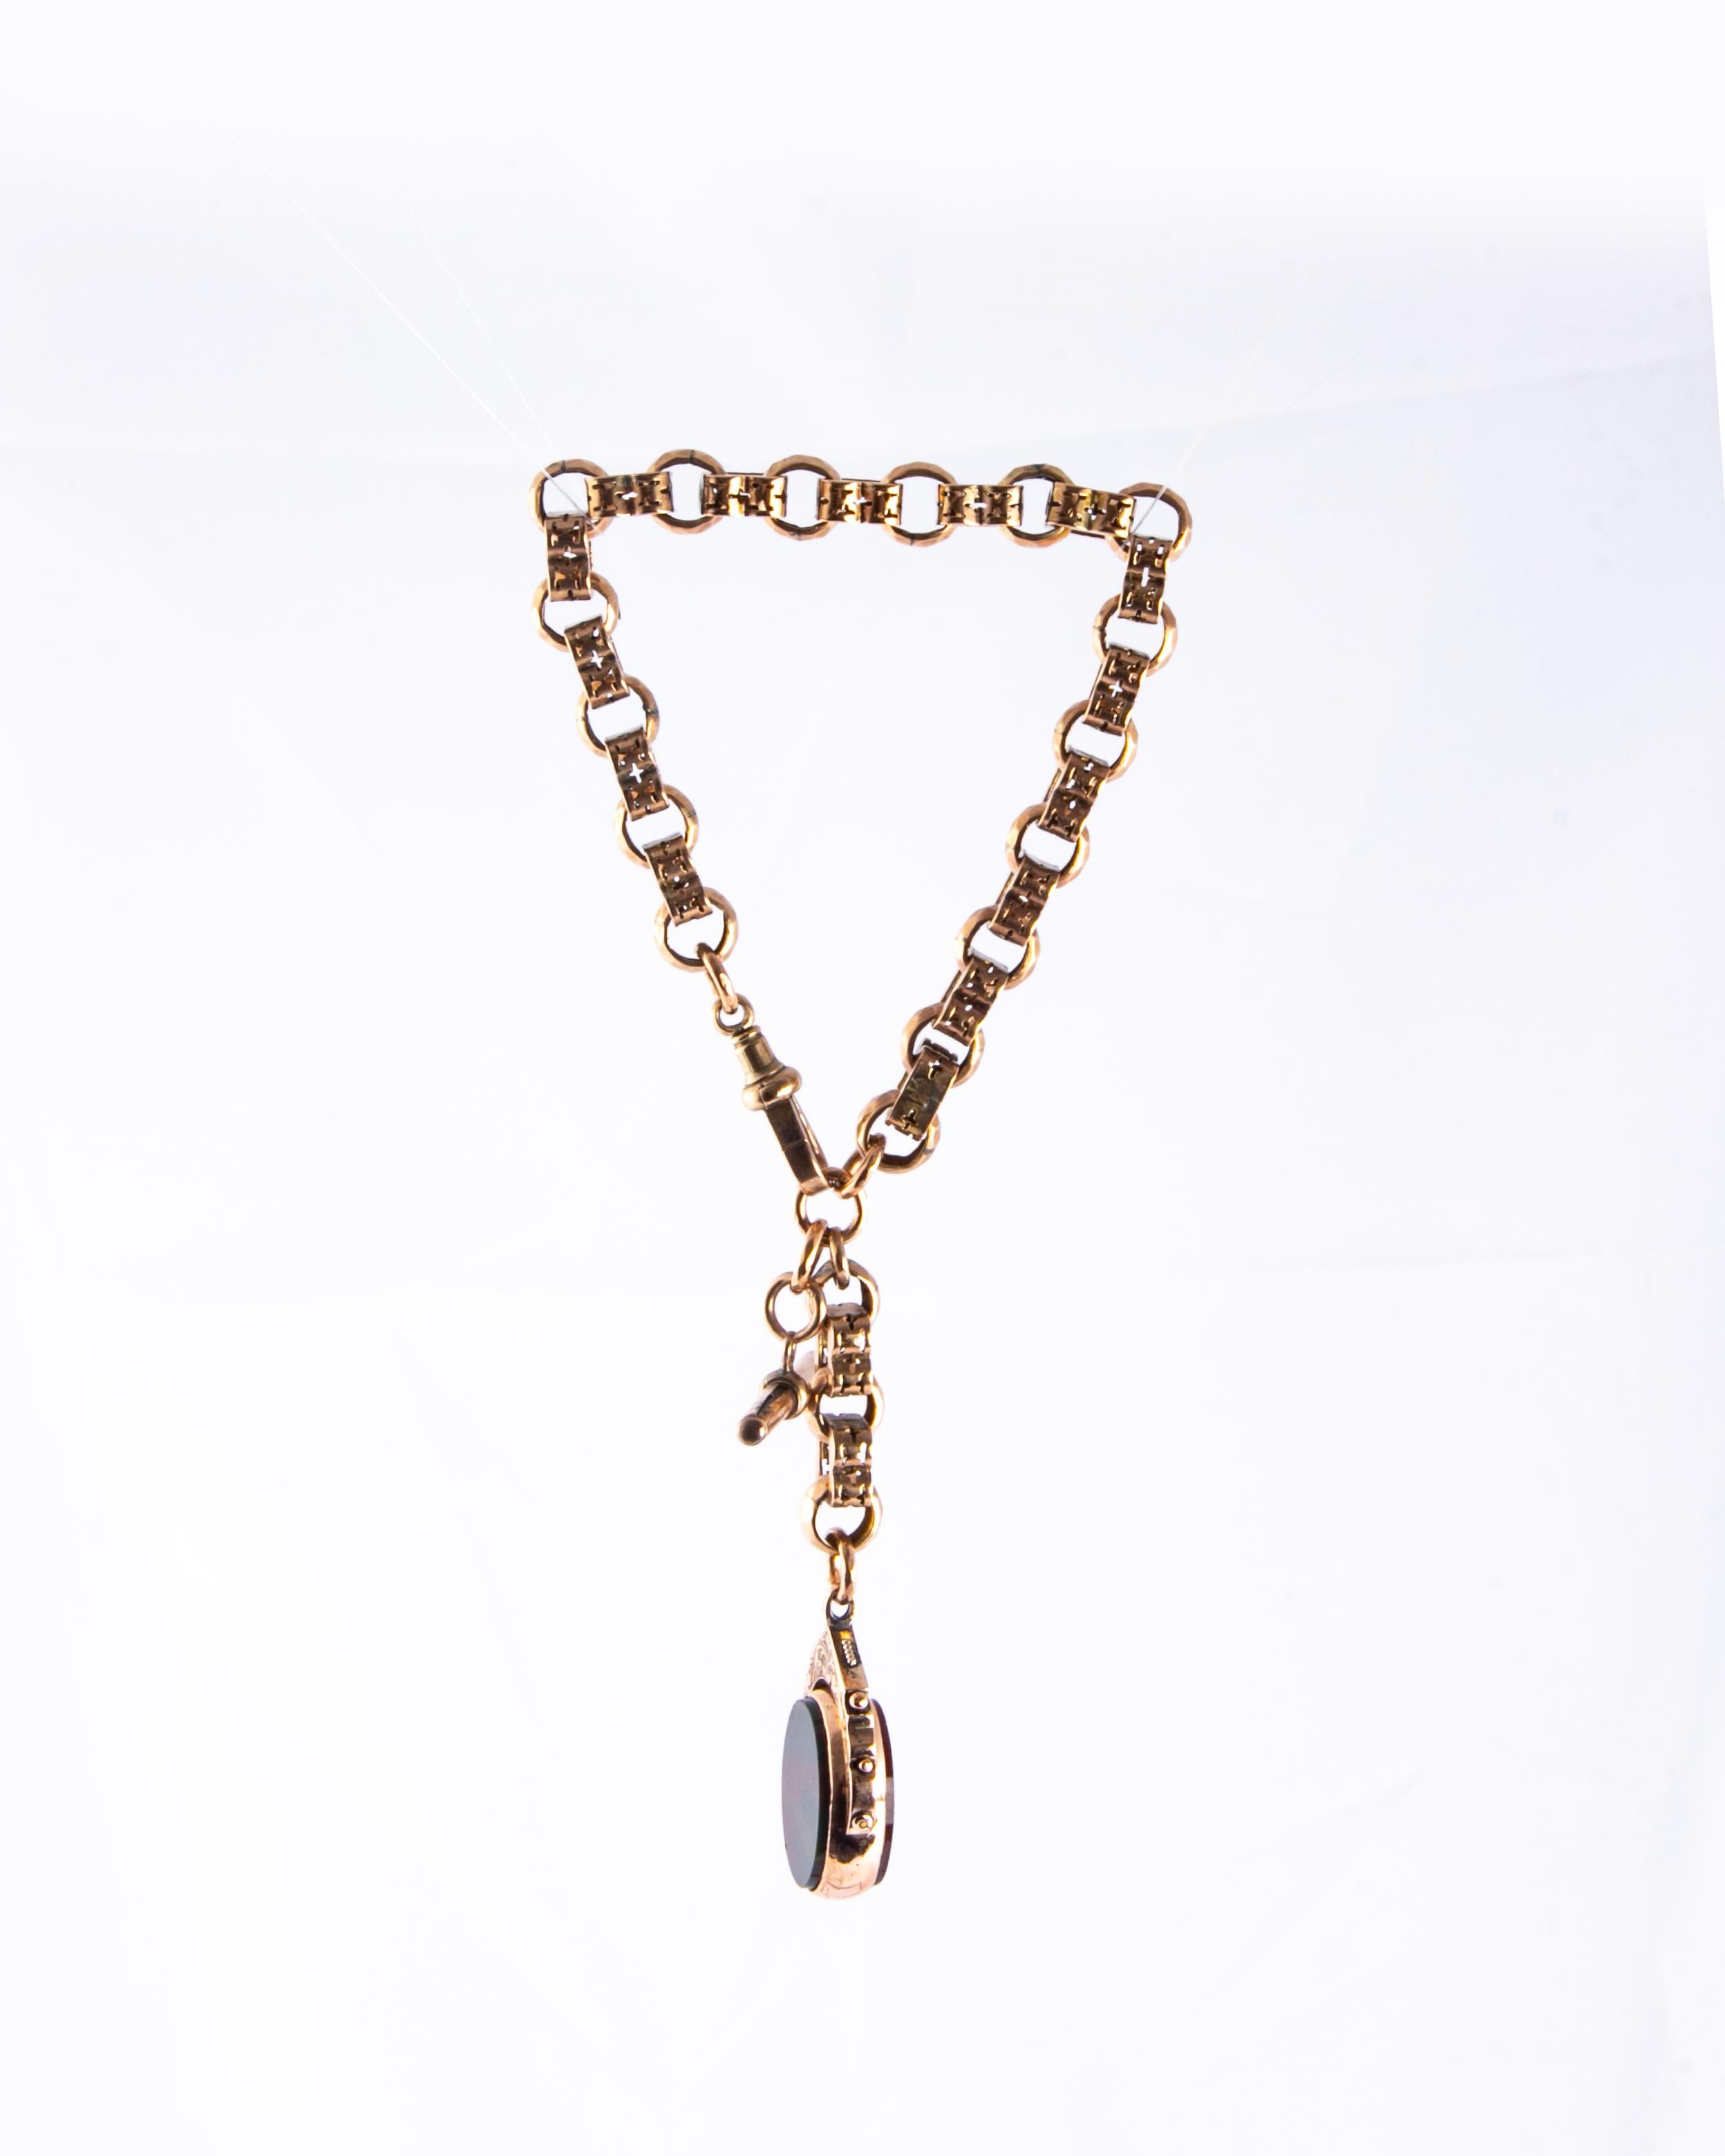 Men's Victorian 9 Carat Gold Albert Chain with Spinning Fob